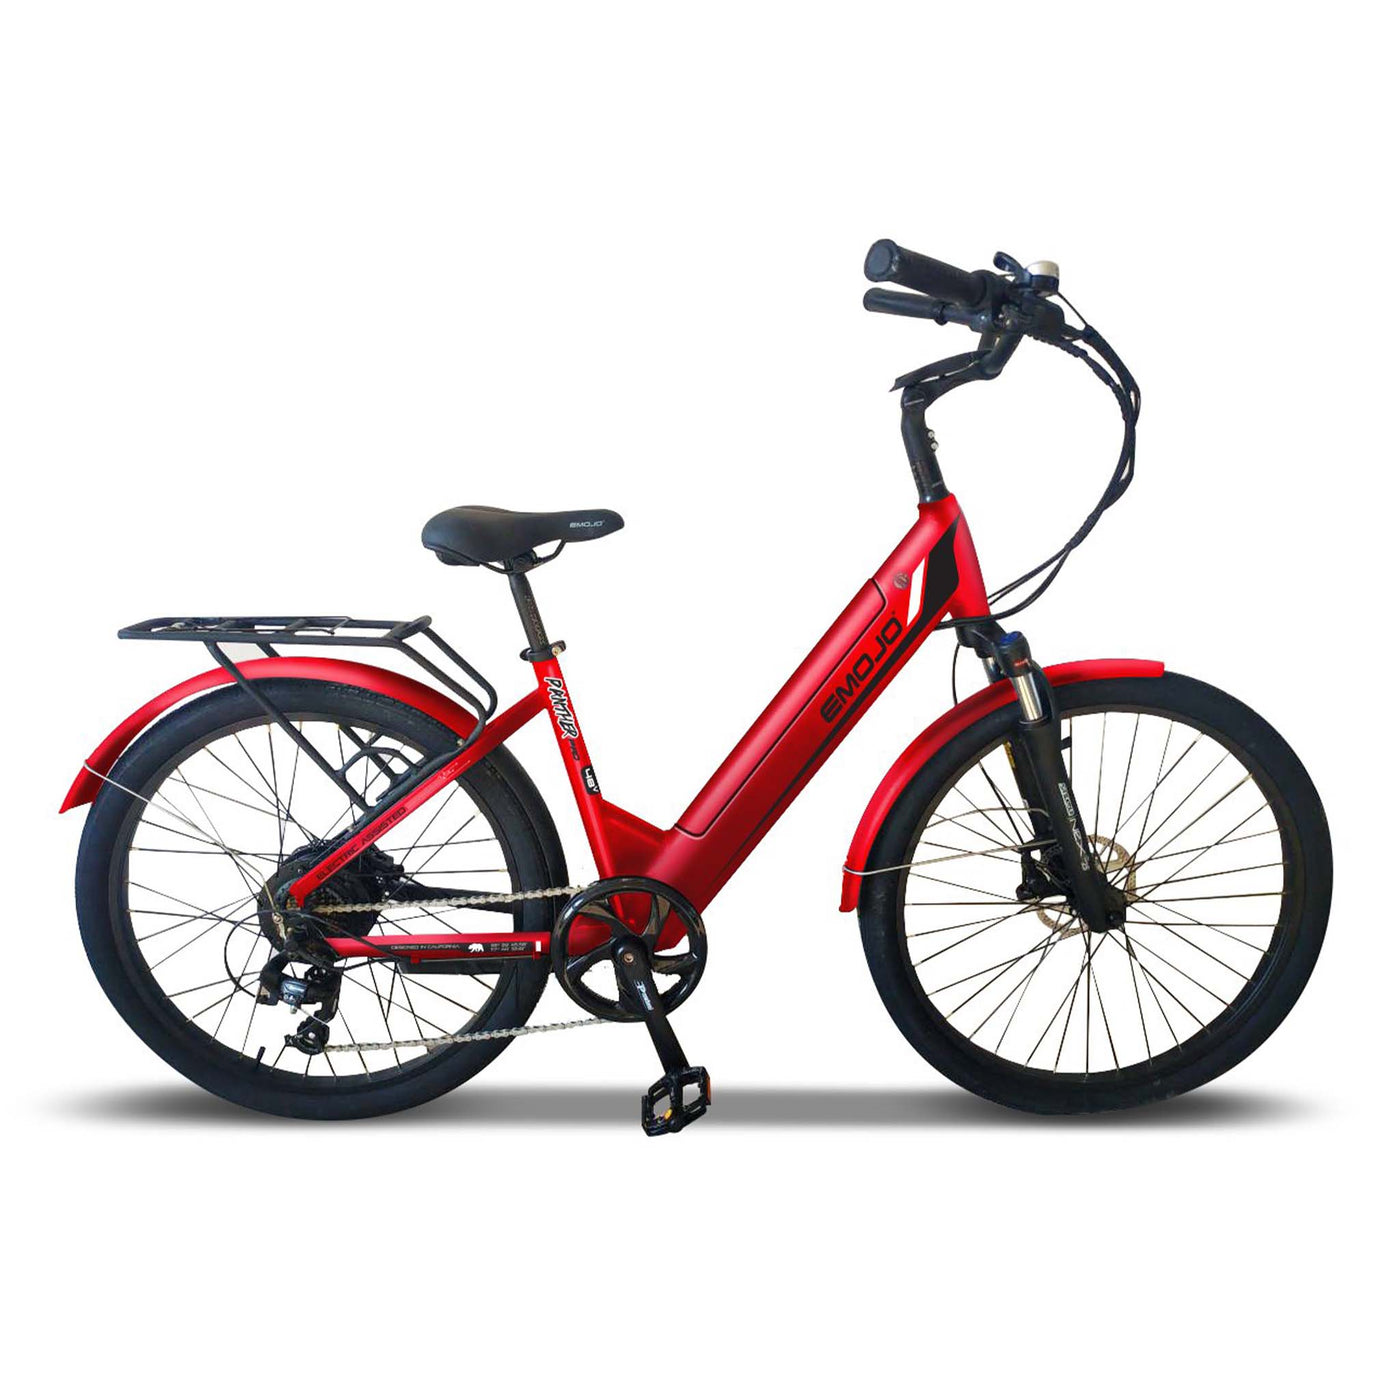 Emojo Panther Pro best selling lightweight step-thru commuter Electric Bike Red